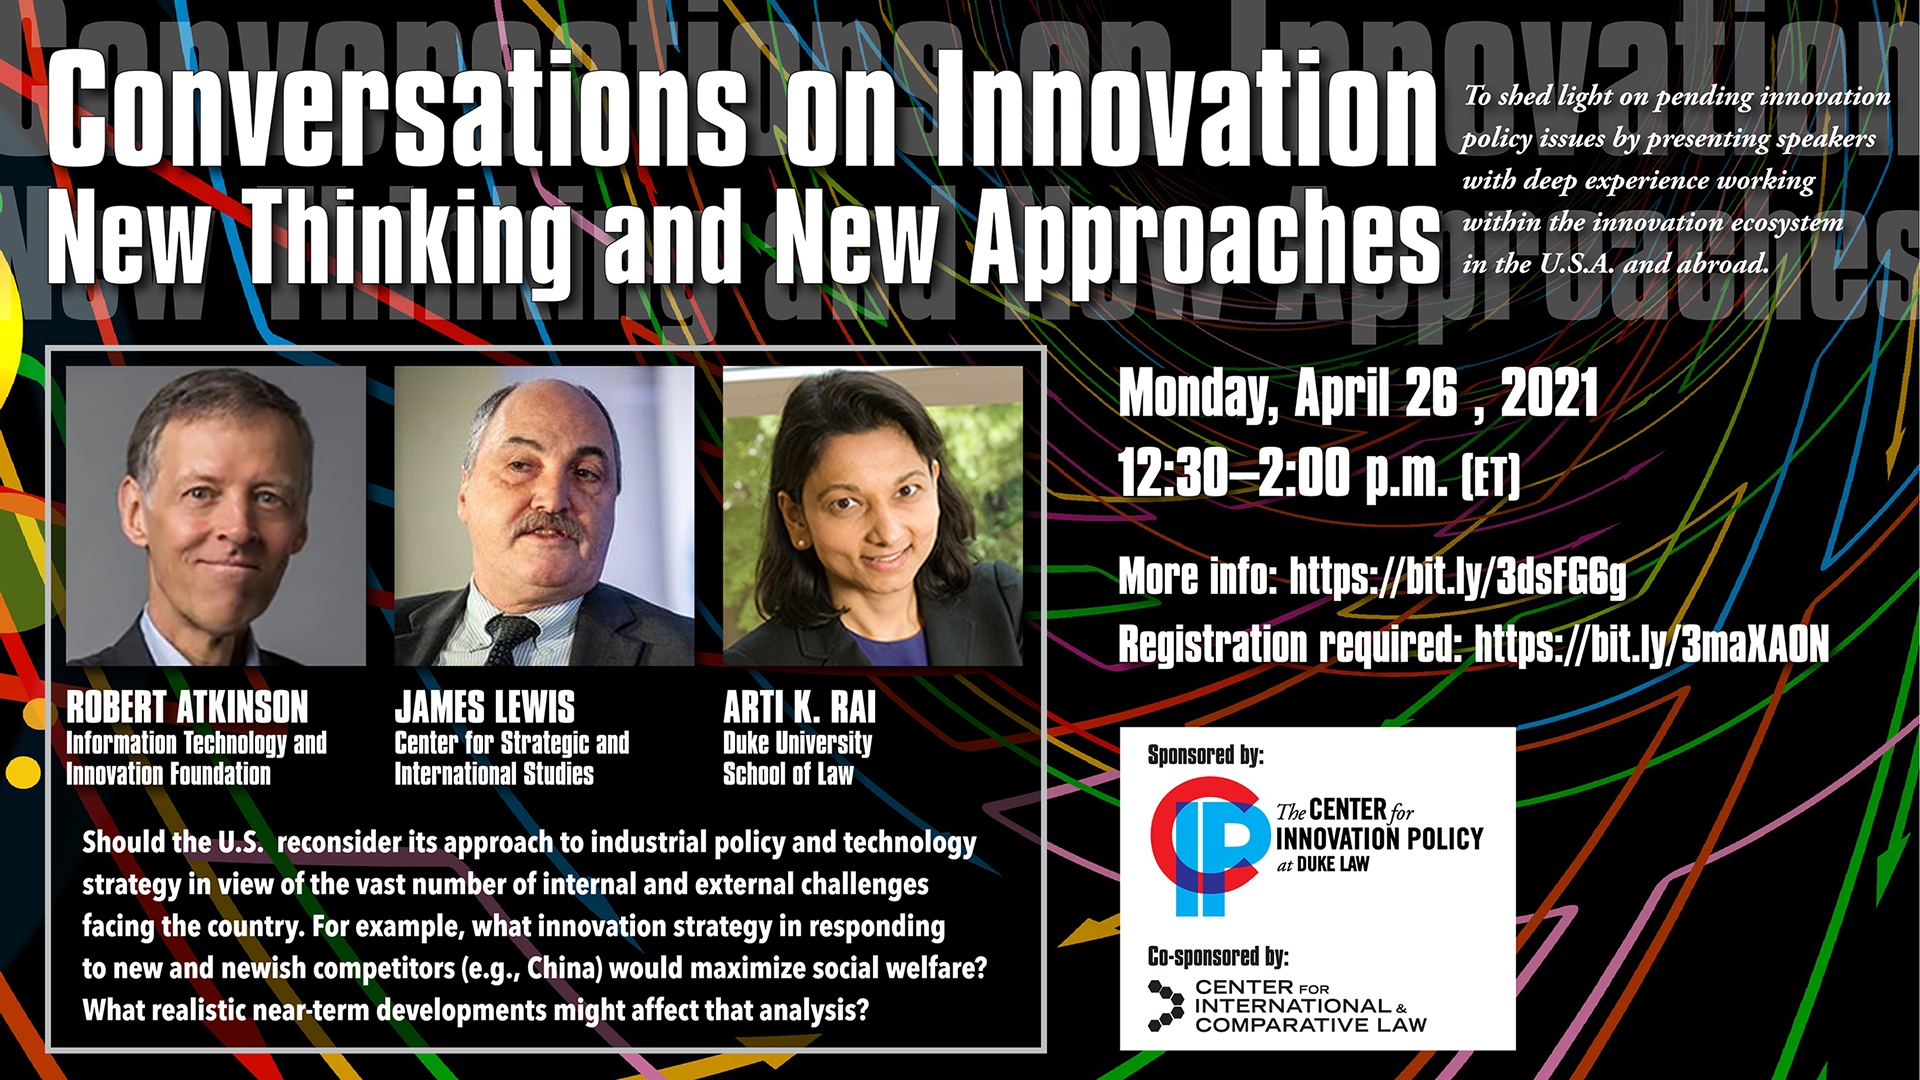 Conversations on Innovation: New Thinking and New Approaches with Robert Atkinson, James Lewis, and Arti Rai | April 26, 2021